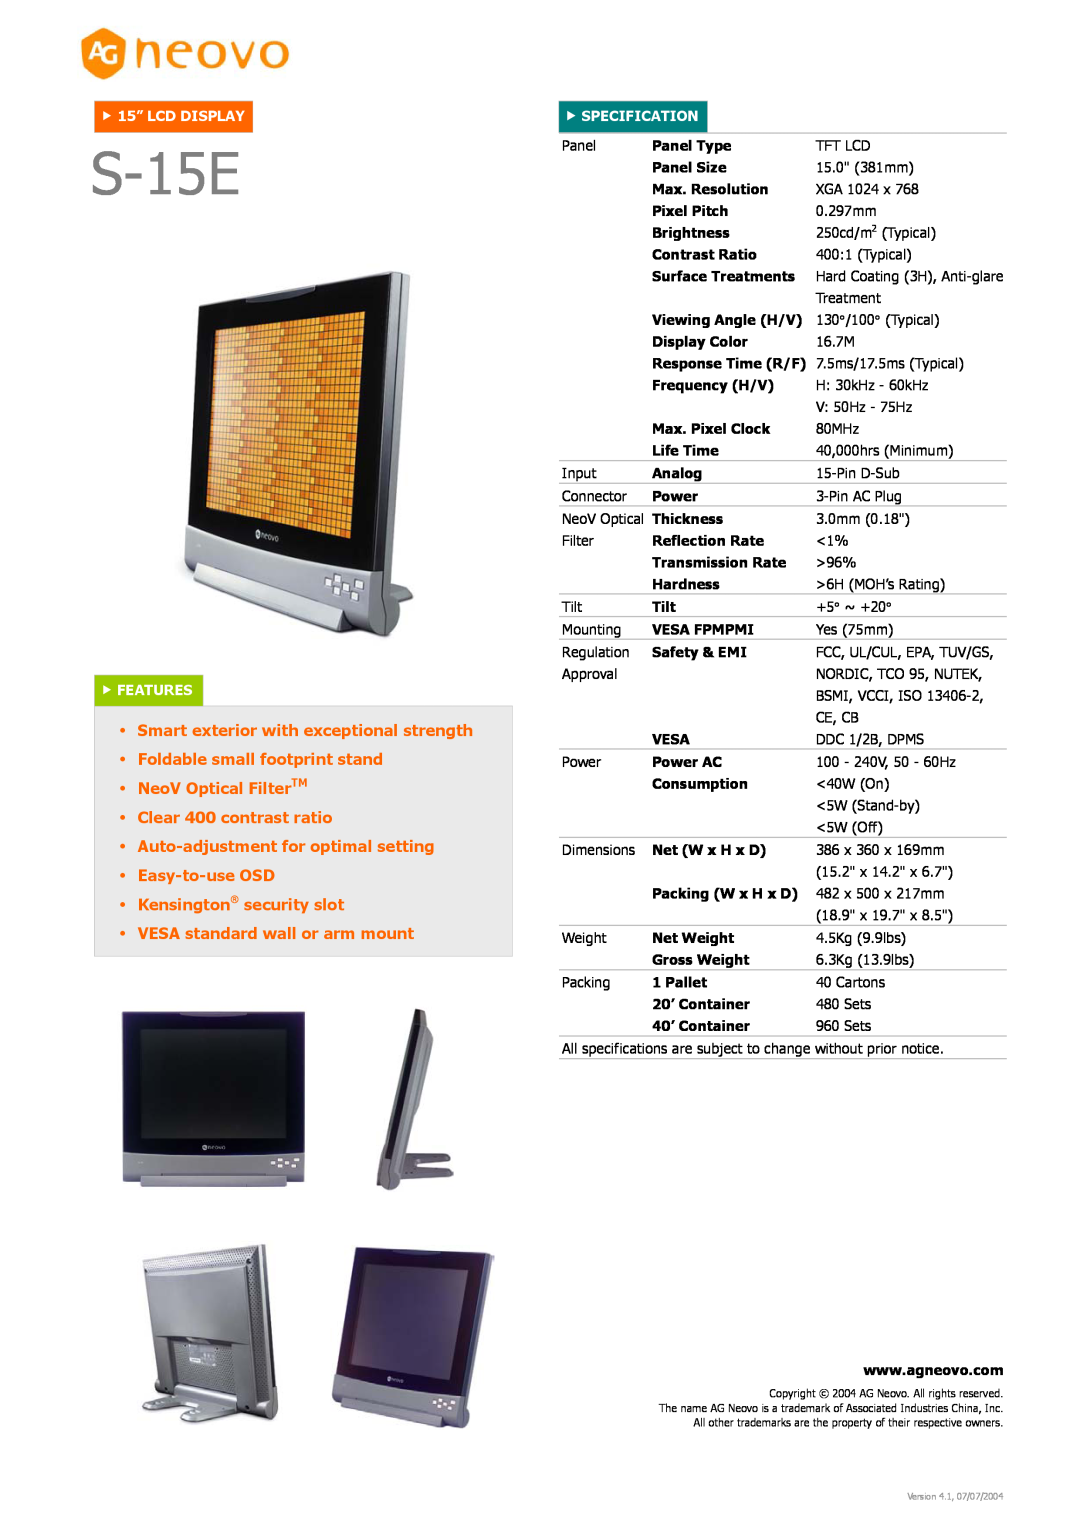 AG Neovo S-15E dimensions NeoV Optical FilterTM Clear 400 contrast ratio, f 15” LCD DISPLAY, f FEATURES, f SPECIFICATION 